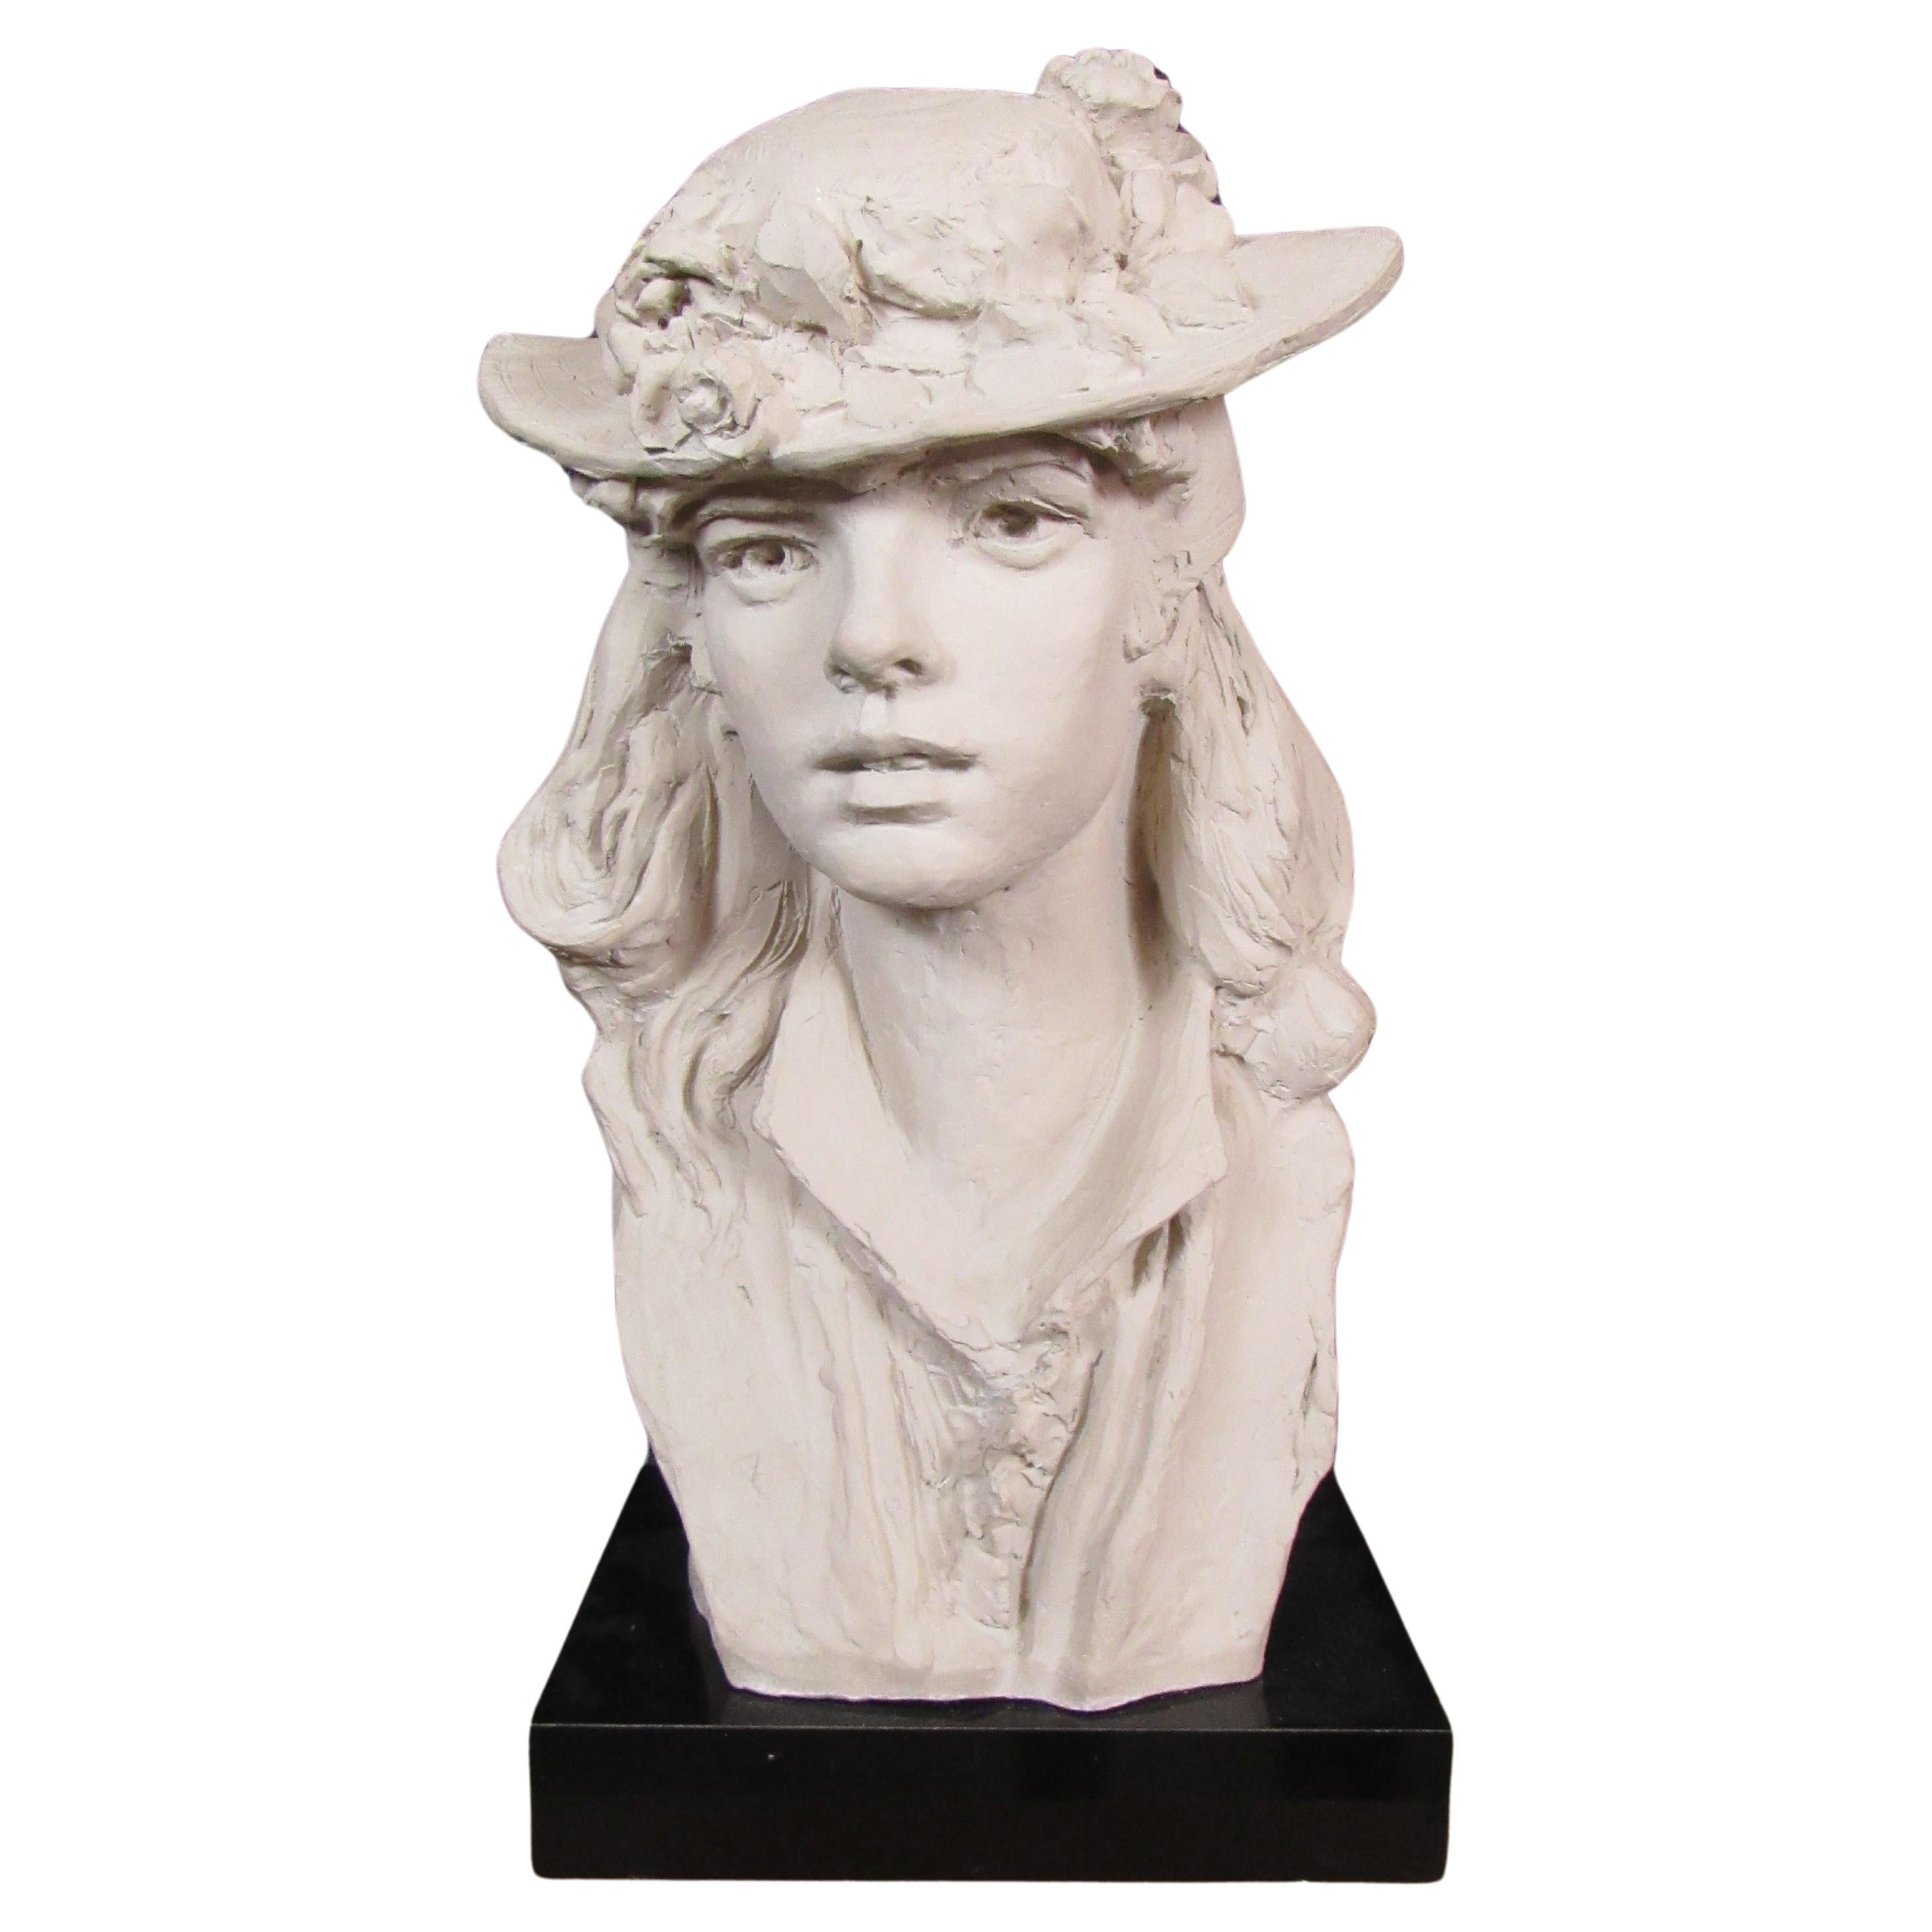 "Young Girl With Roses on Her Hat" by Austin Productions after A. Rodin (1979) For Sale